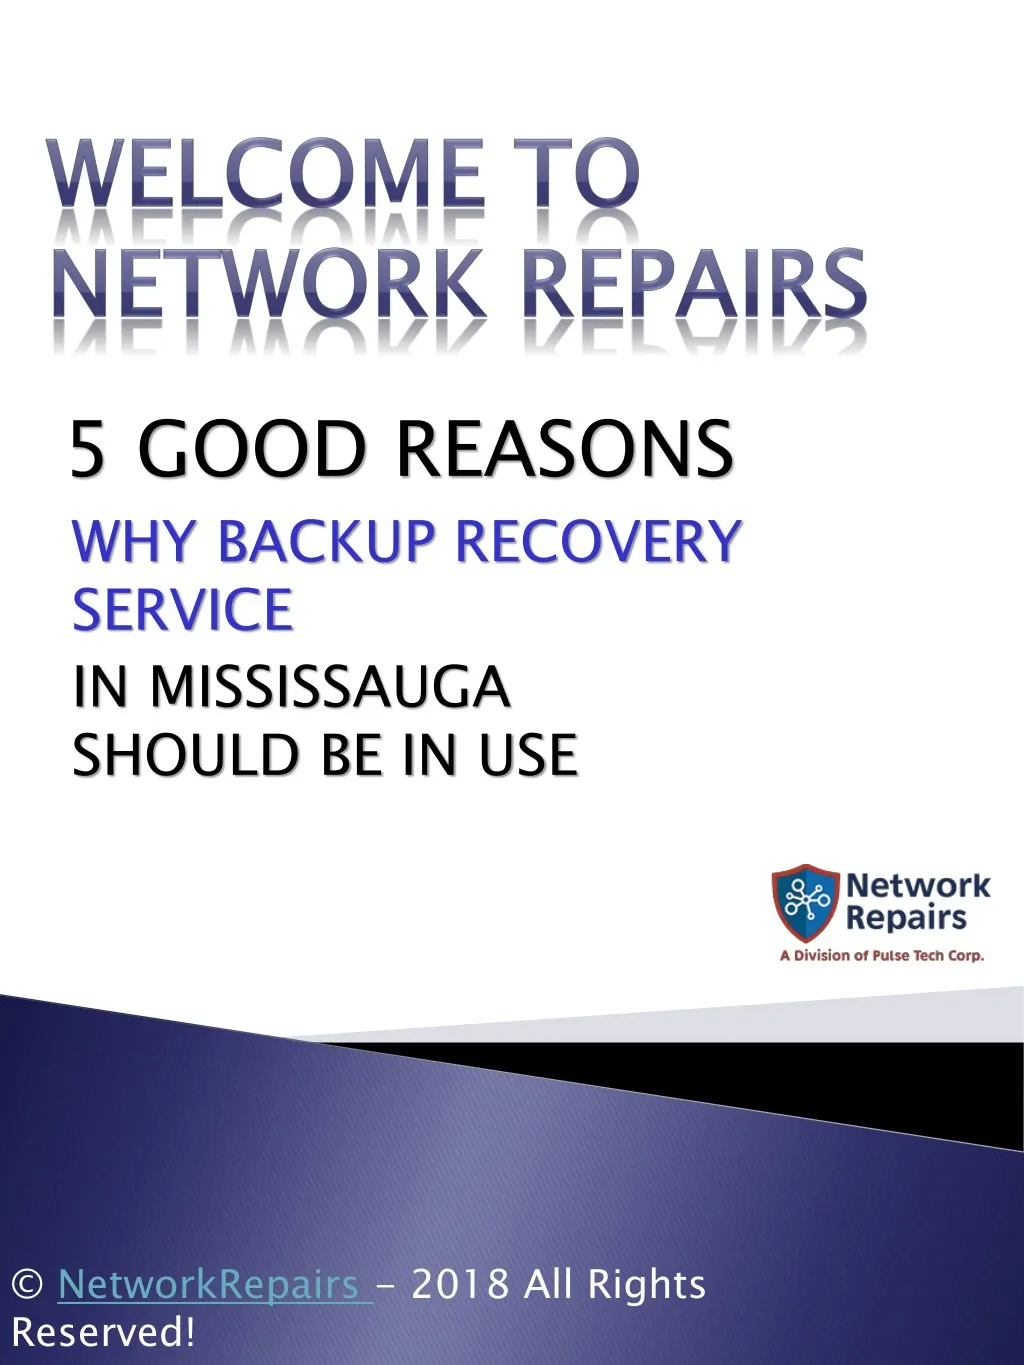 5 good reasons why backup recovery service